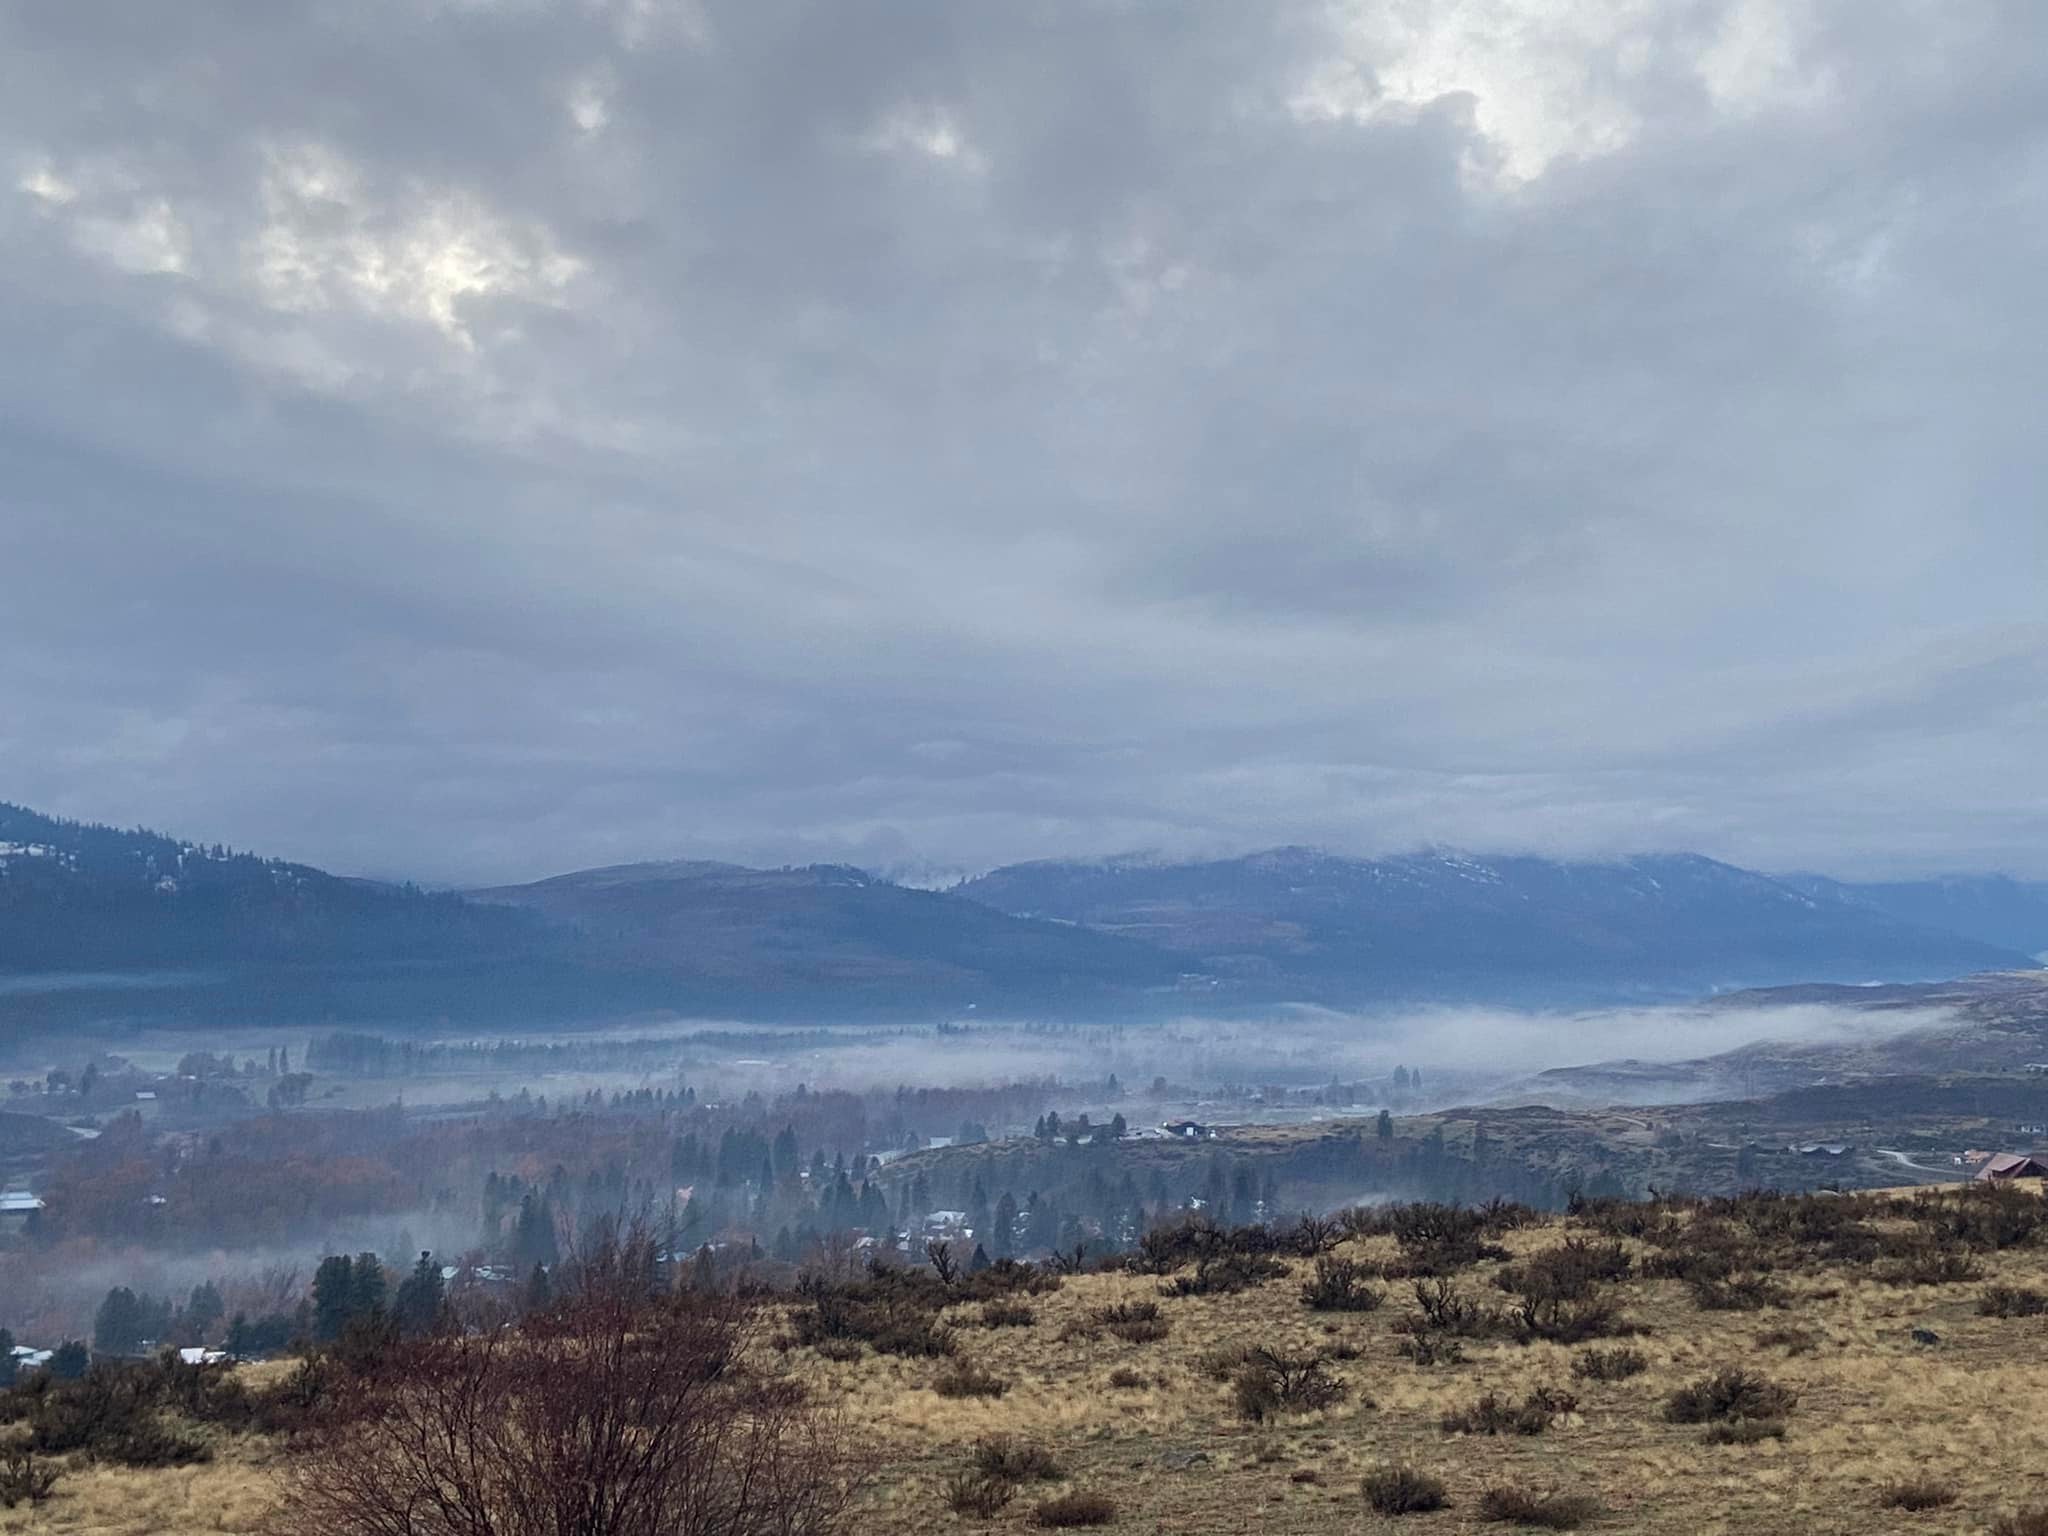 cloudy day in the Methow Valley